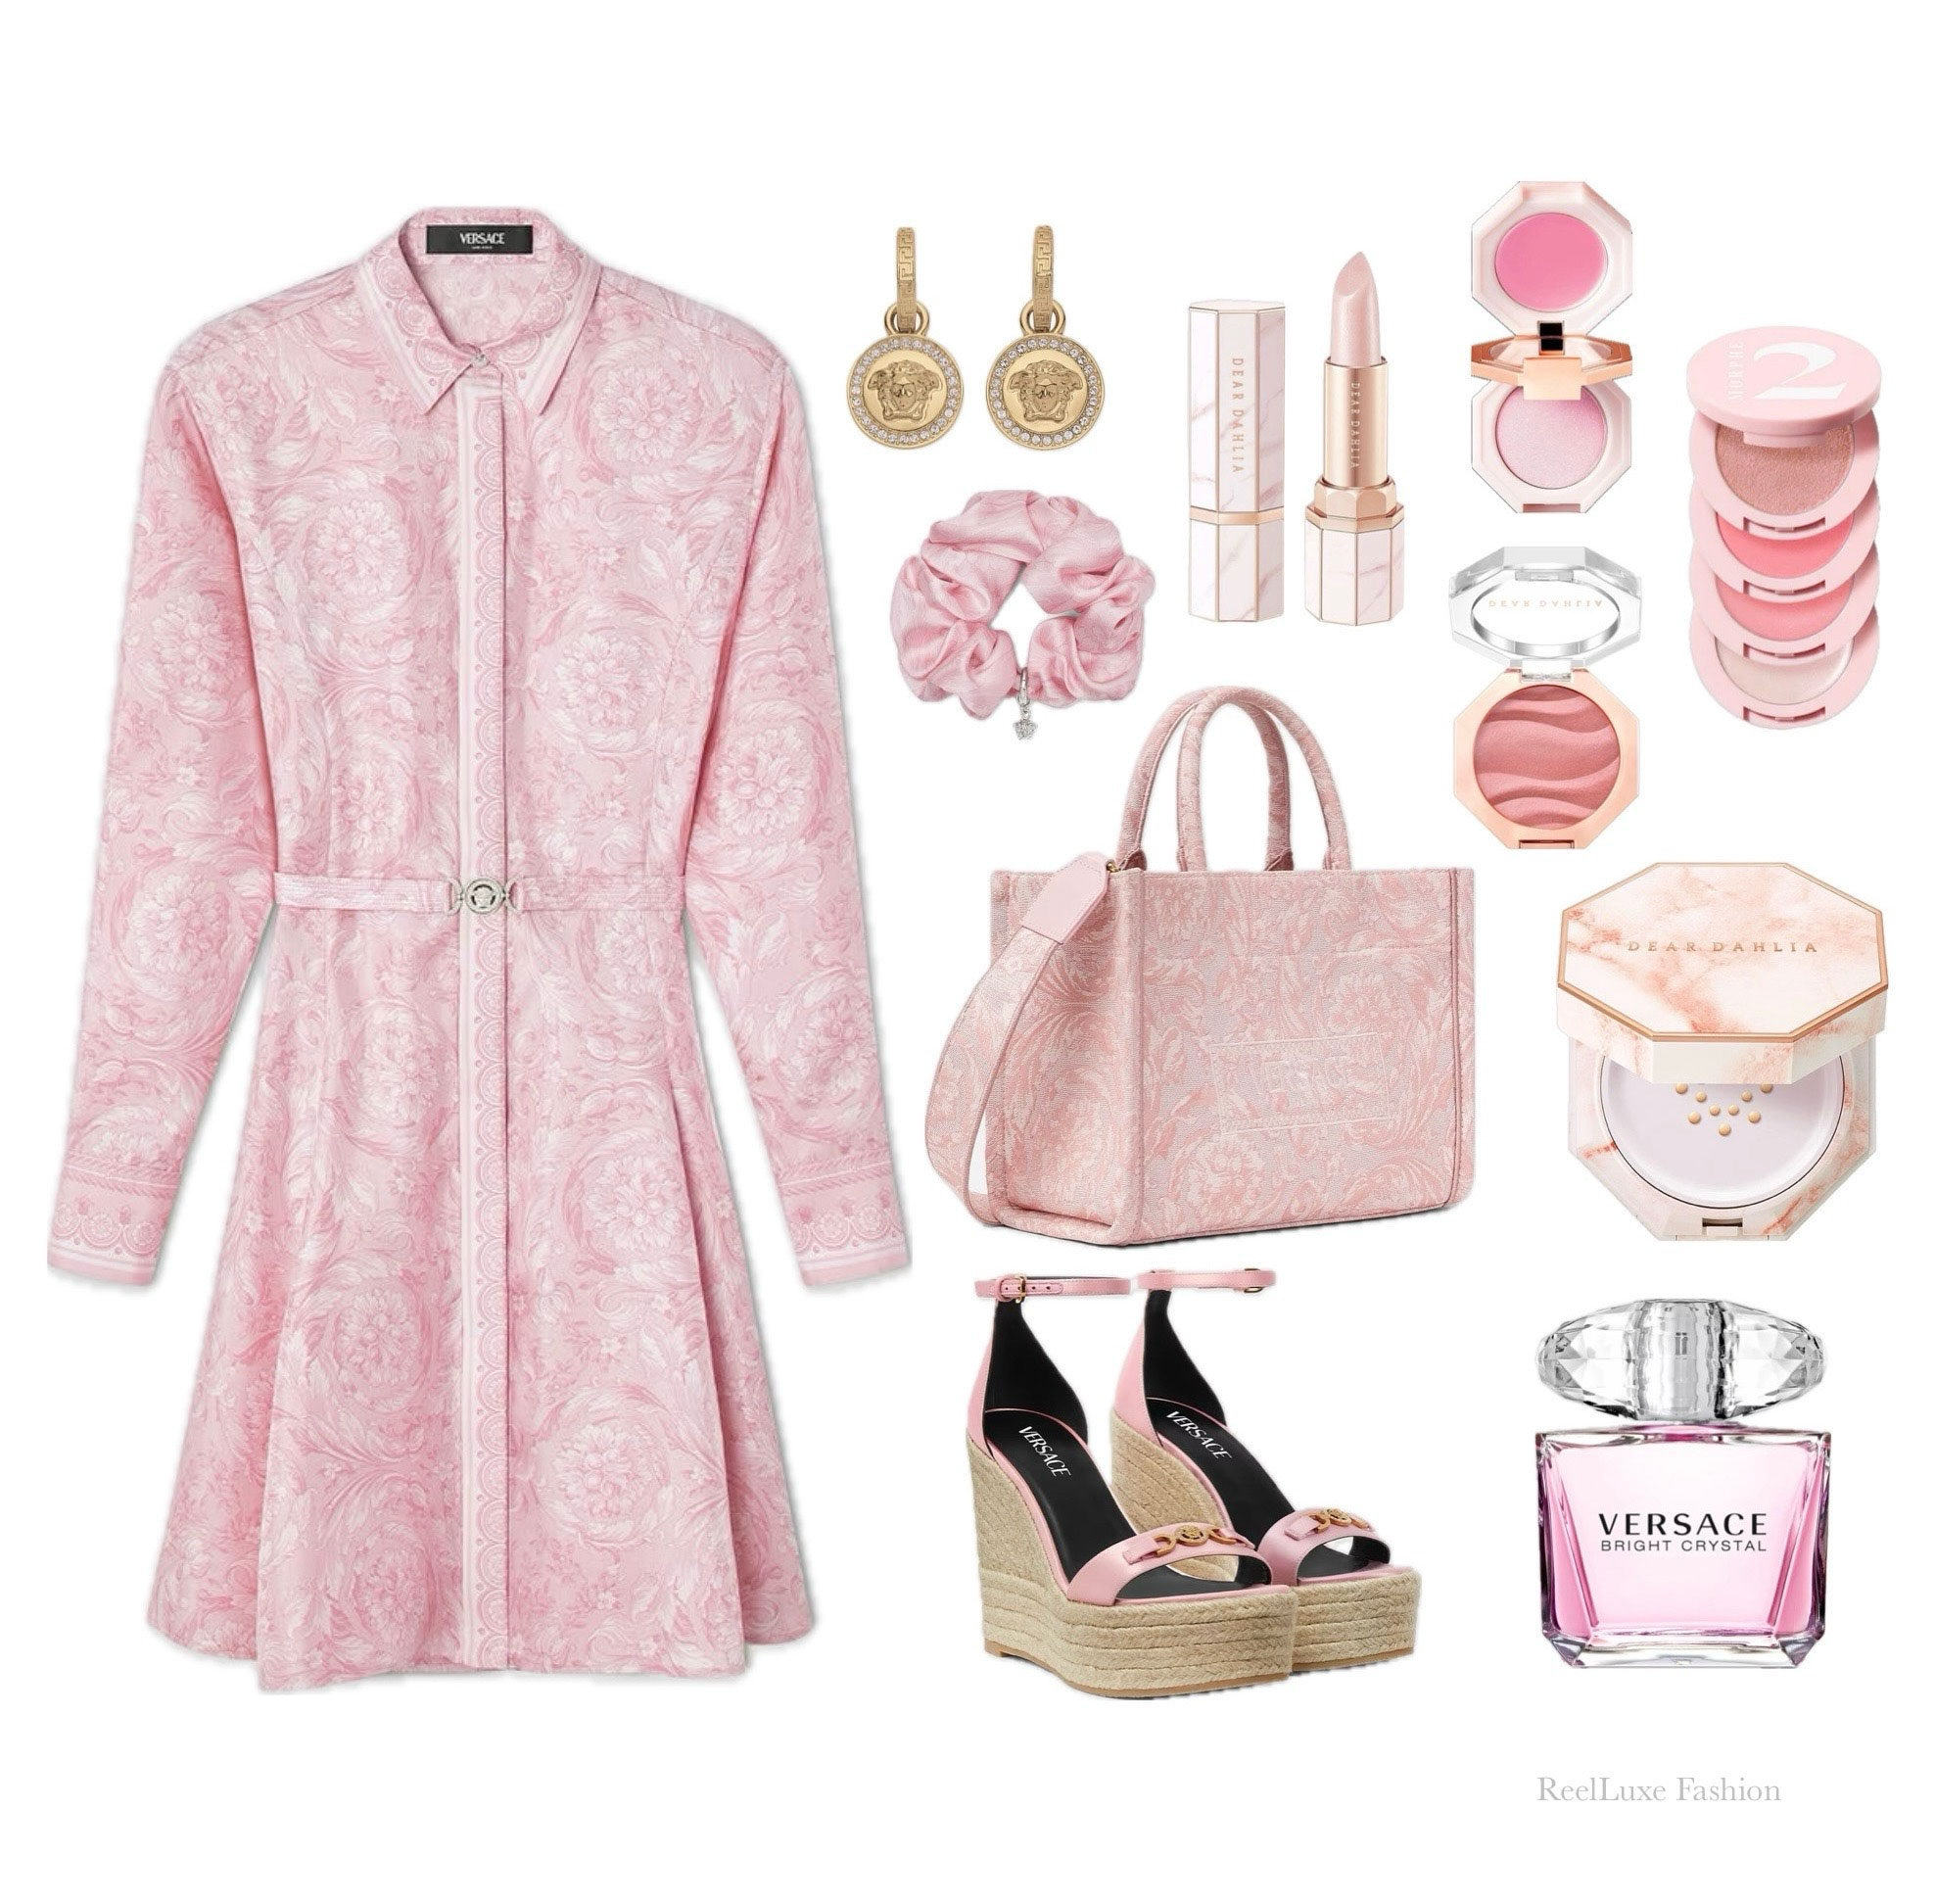 New Season Collection by Versace: Total Pink Versace Outfit Idea from Versace Firenze Boutique, Plus Beauty Products